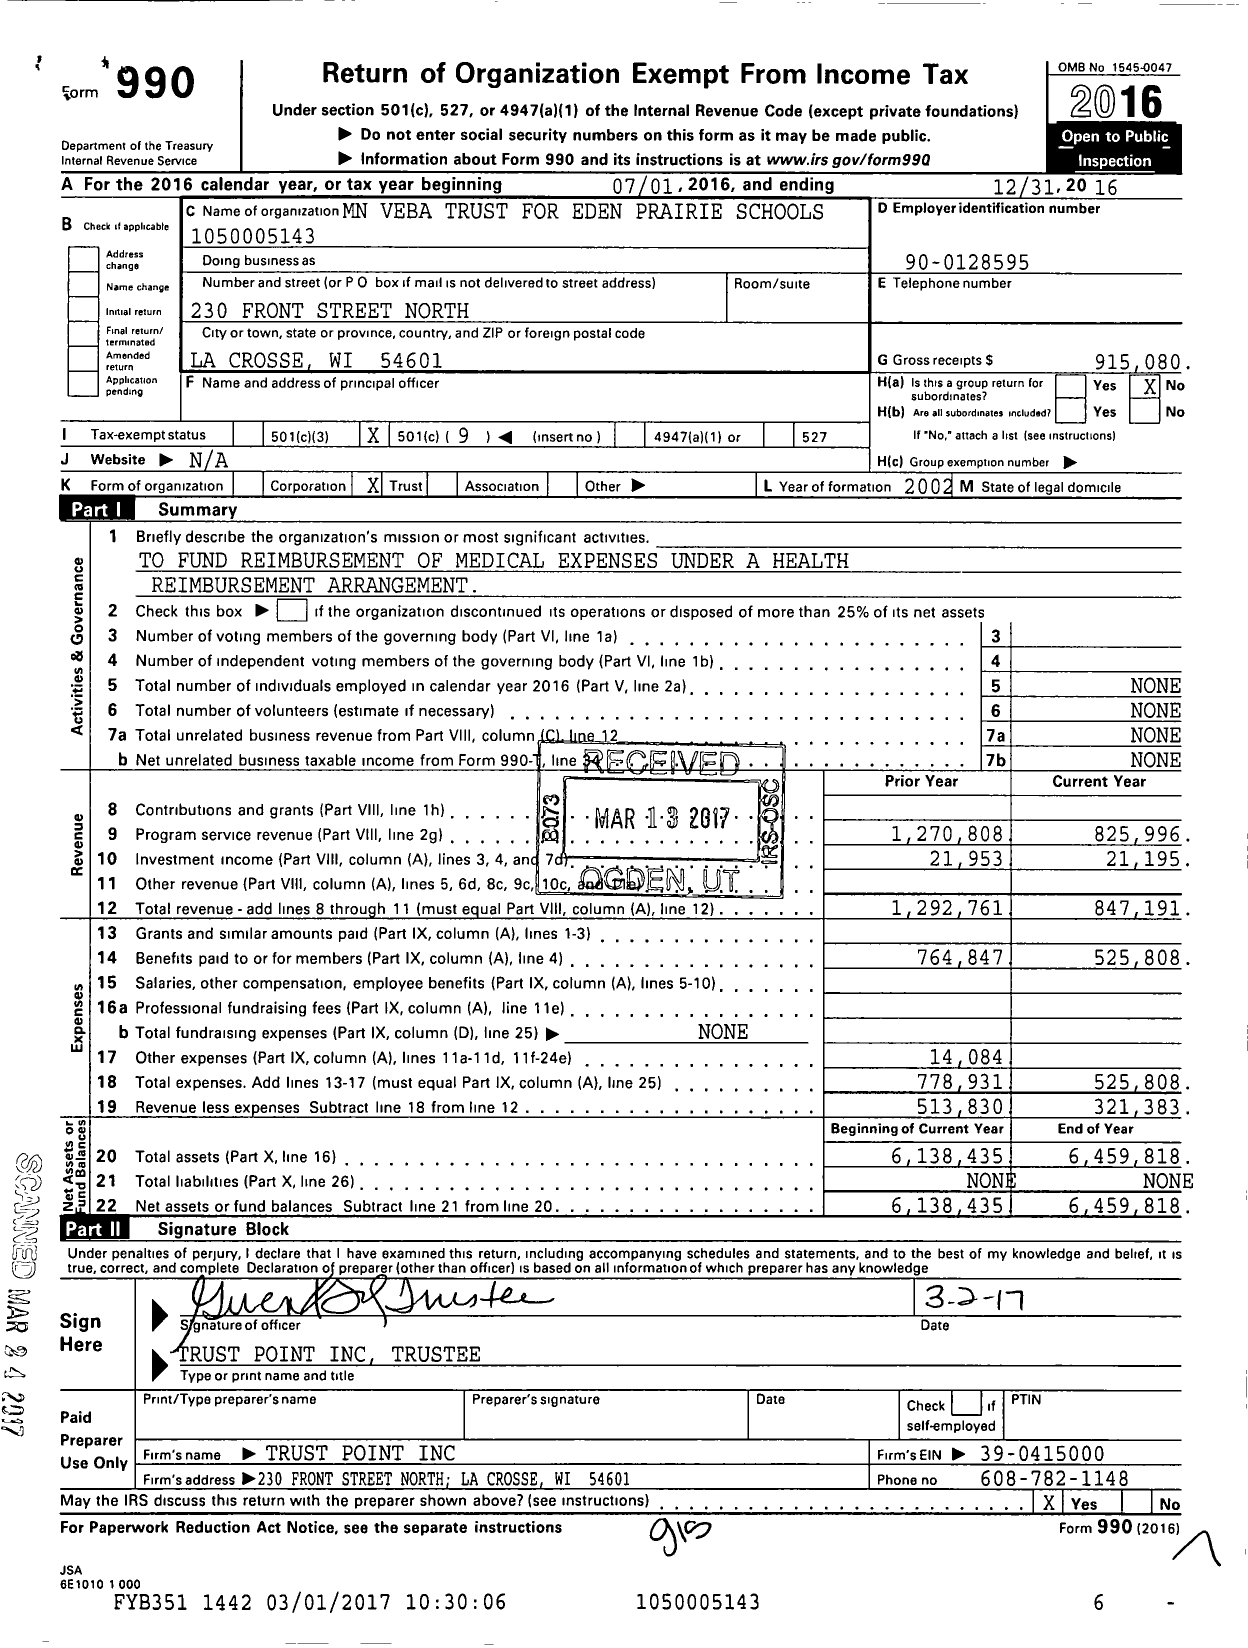 Image of first page of 2016 Form 990O for MN Veba Trust for Eden Prairie Schools 1050005143